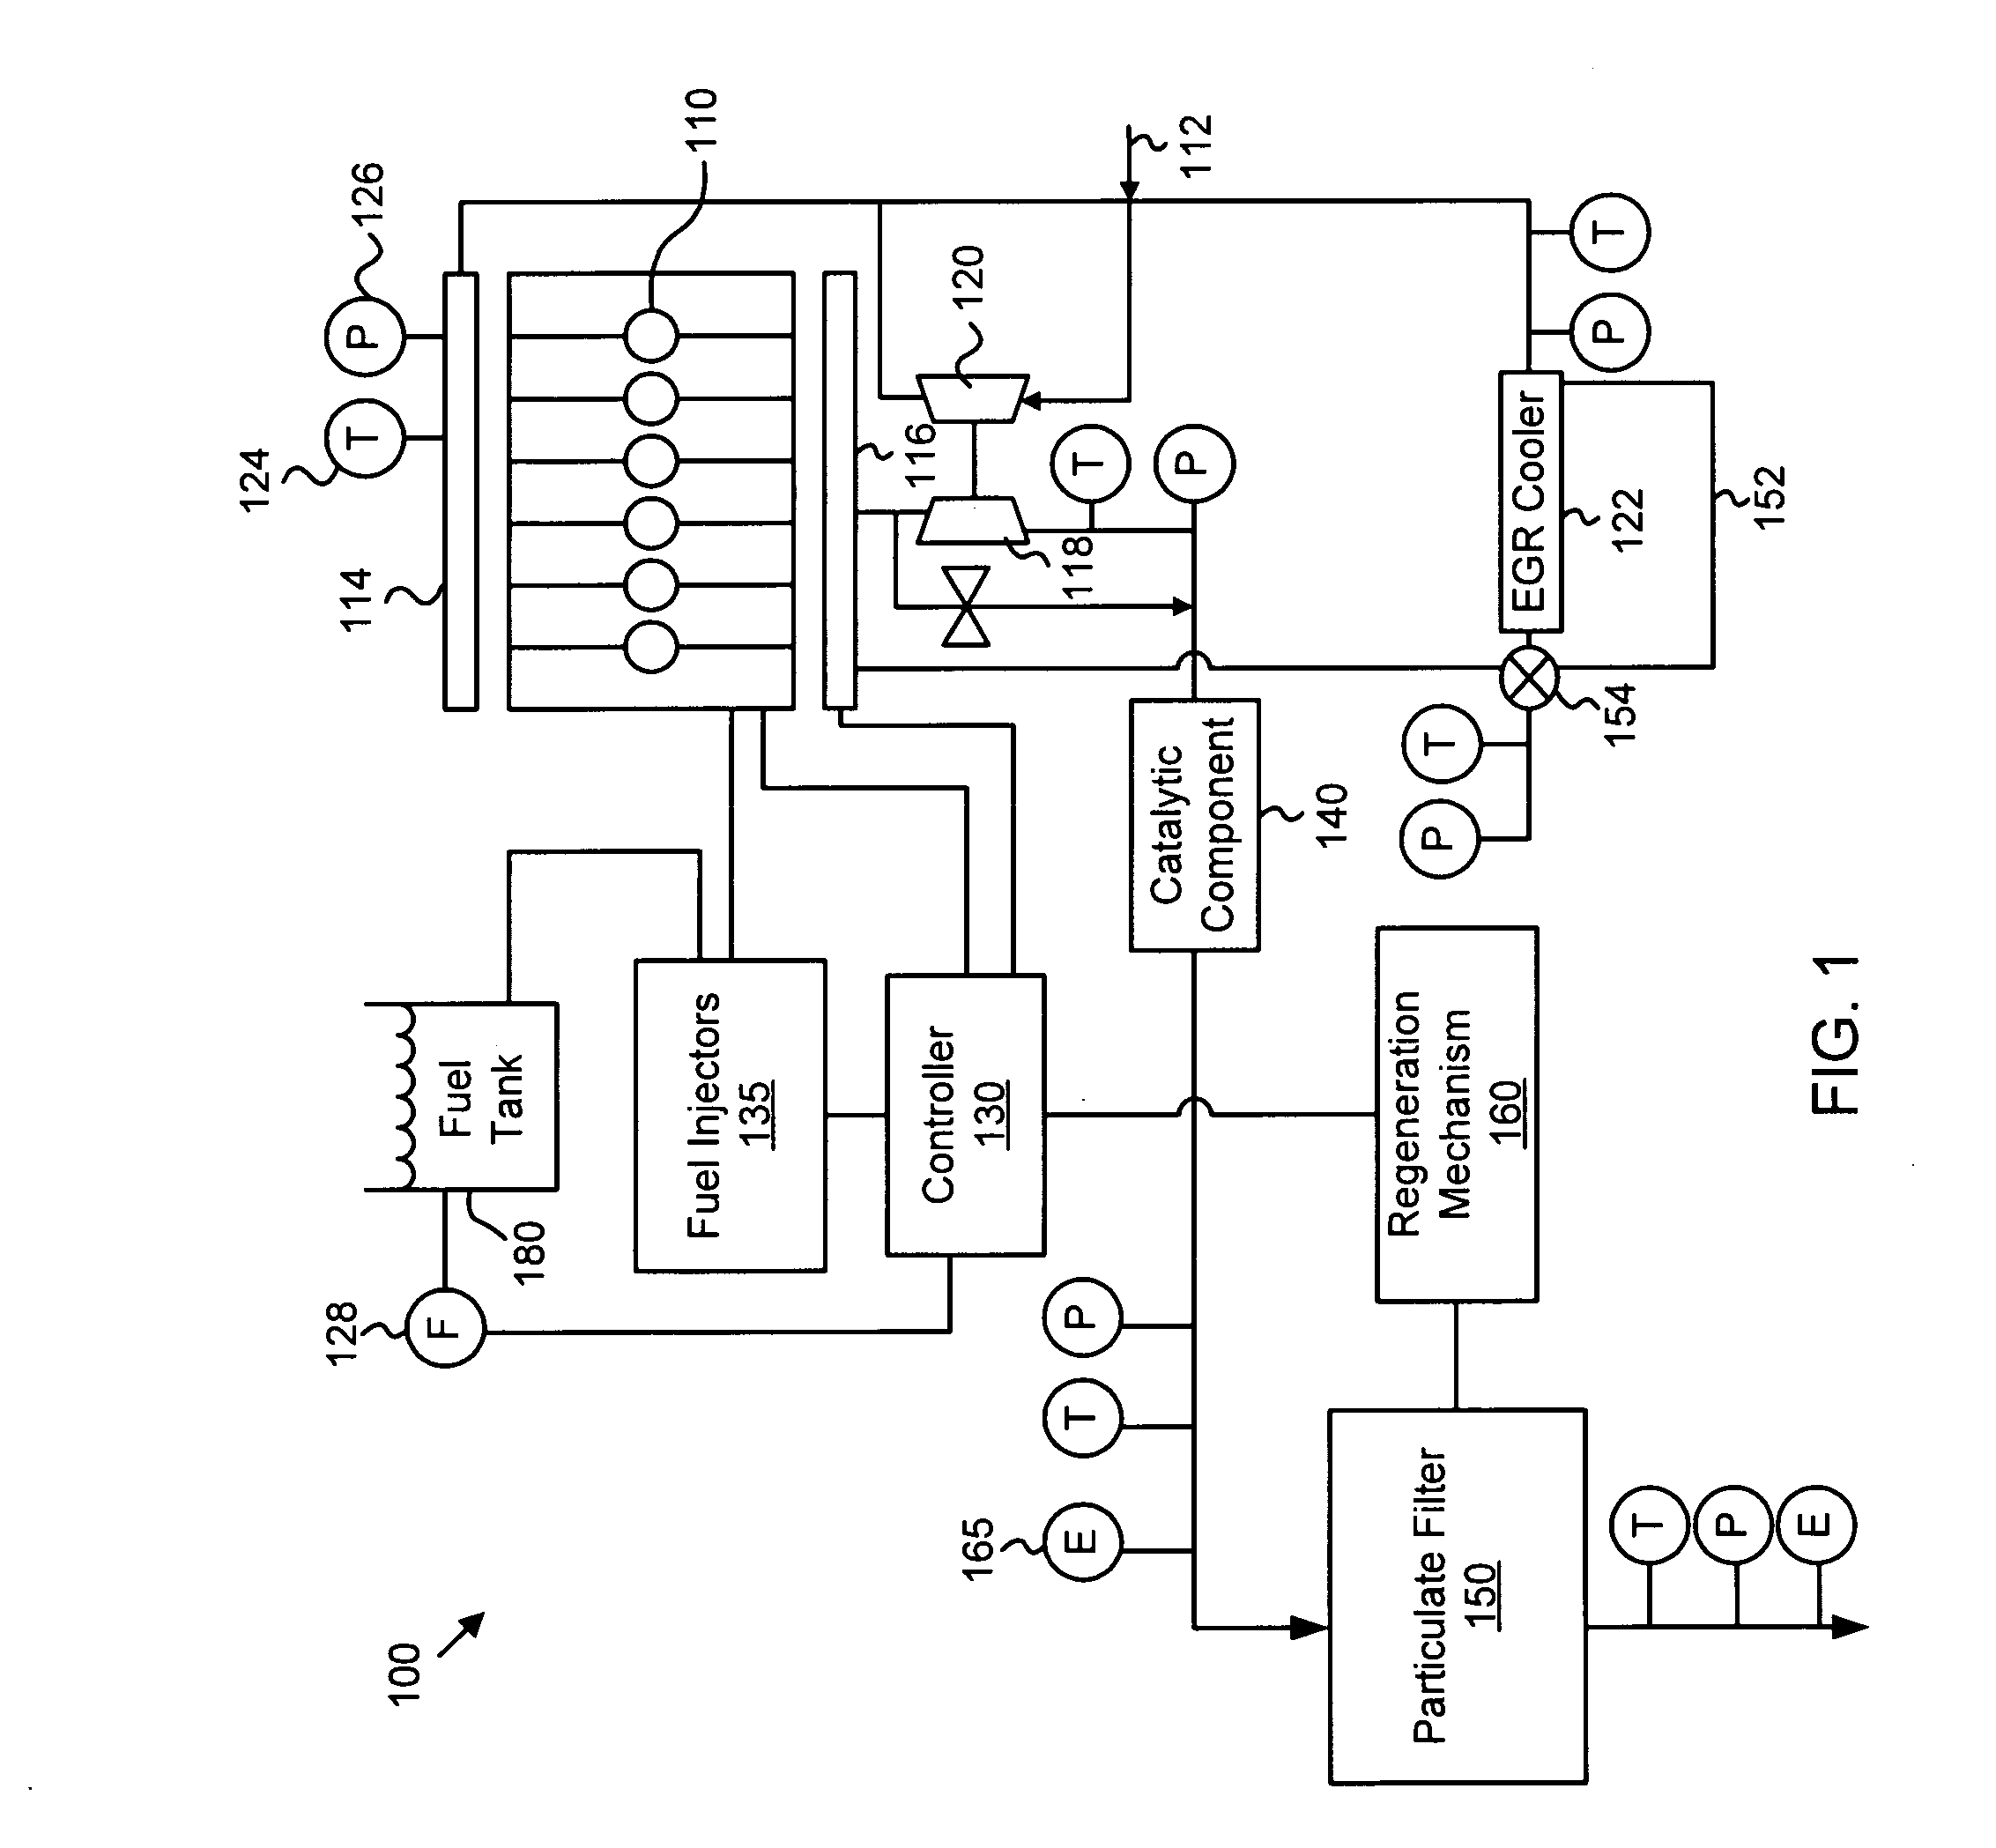 Apparatus, system, and method for estimating particulate production